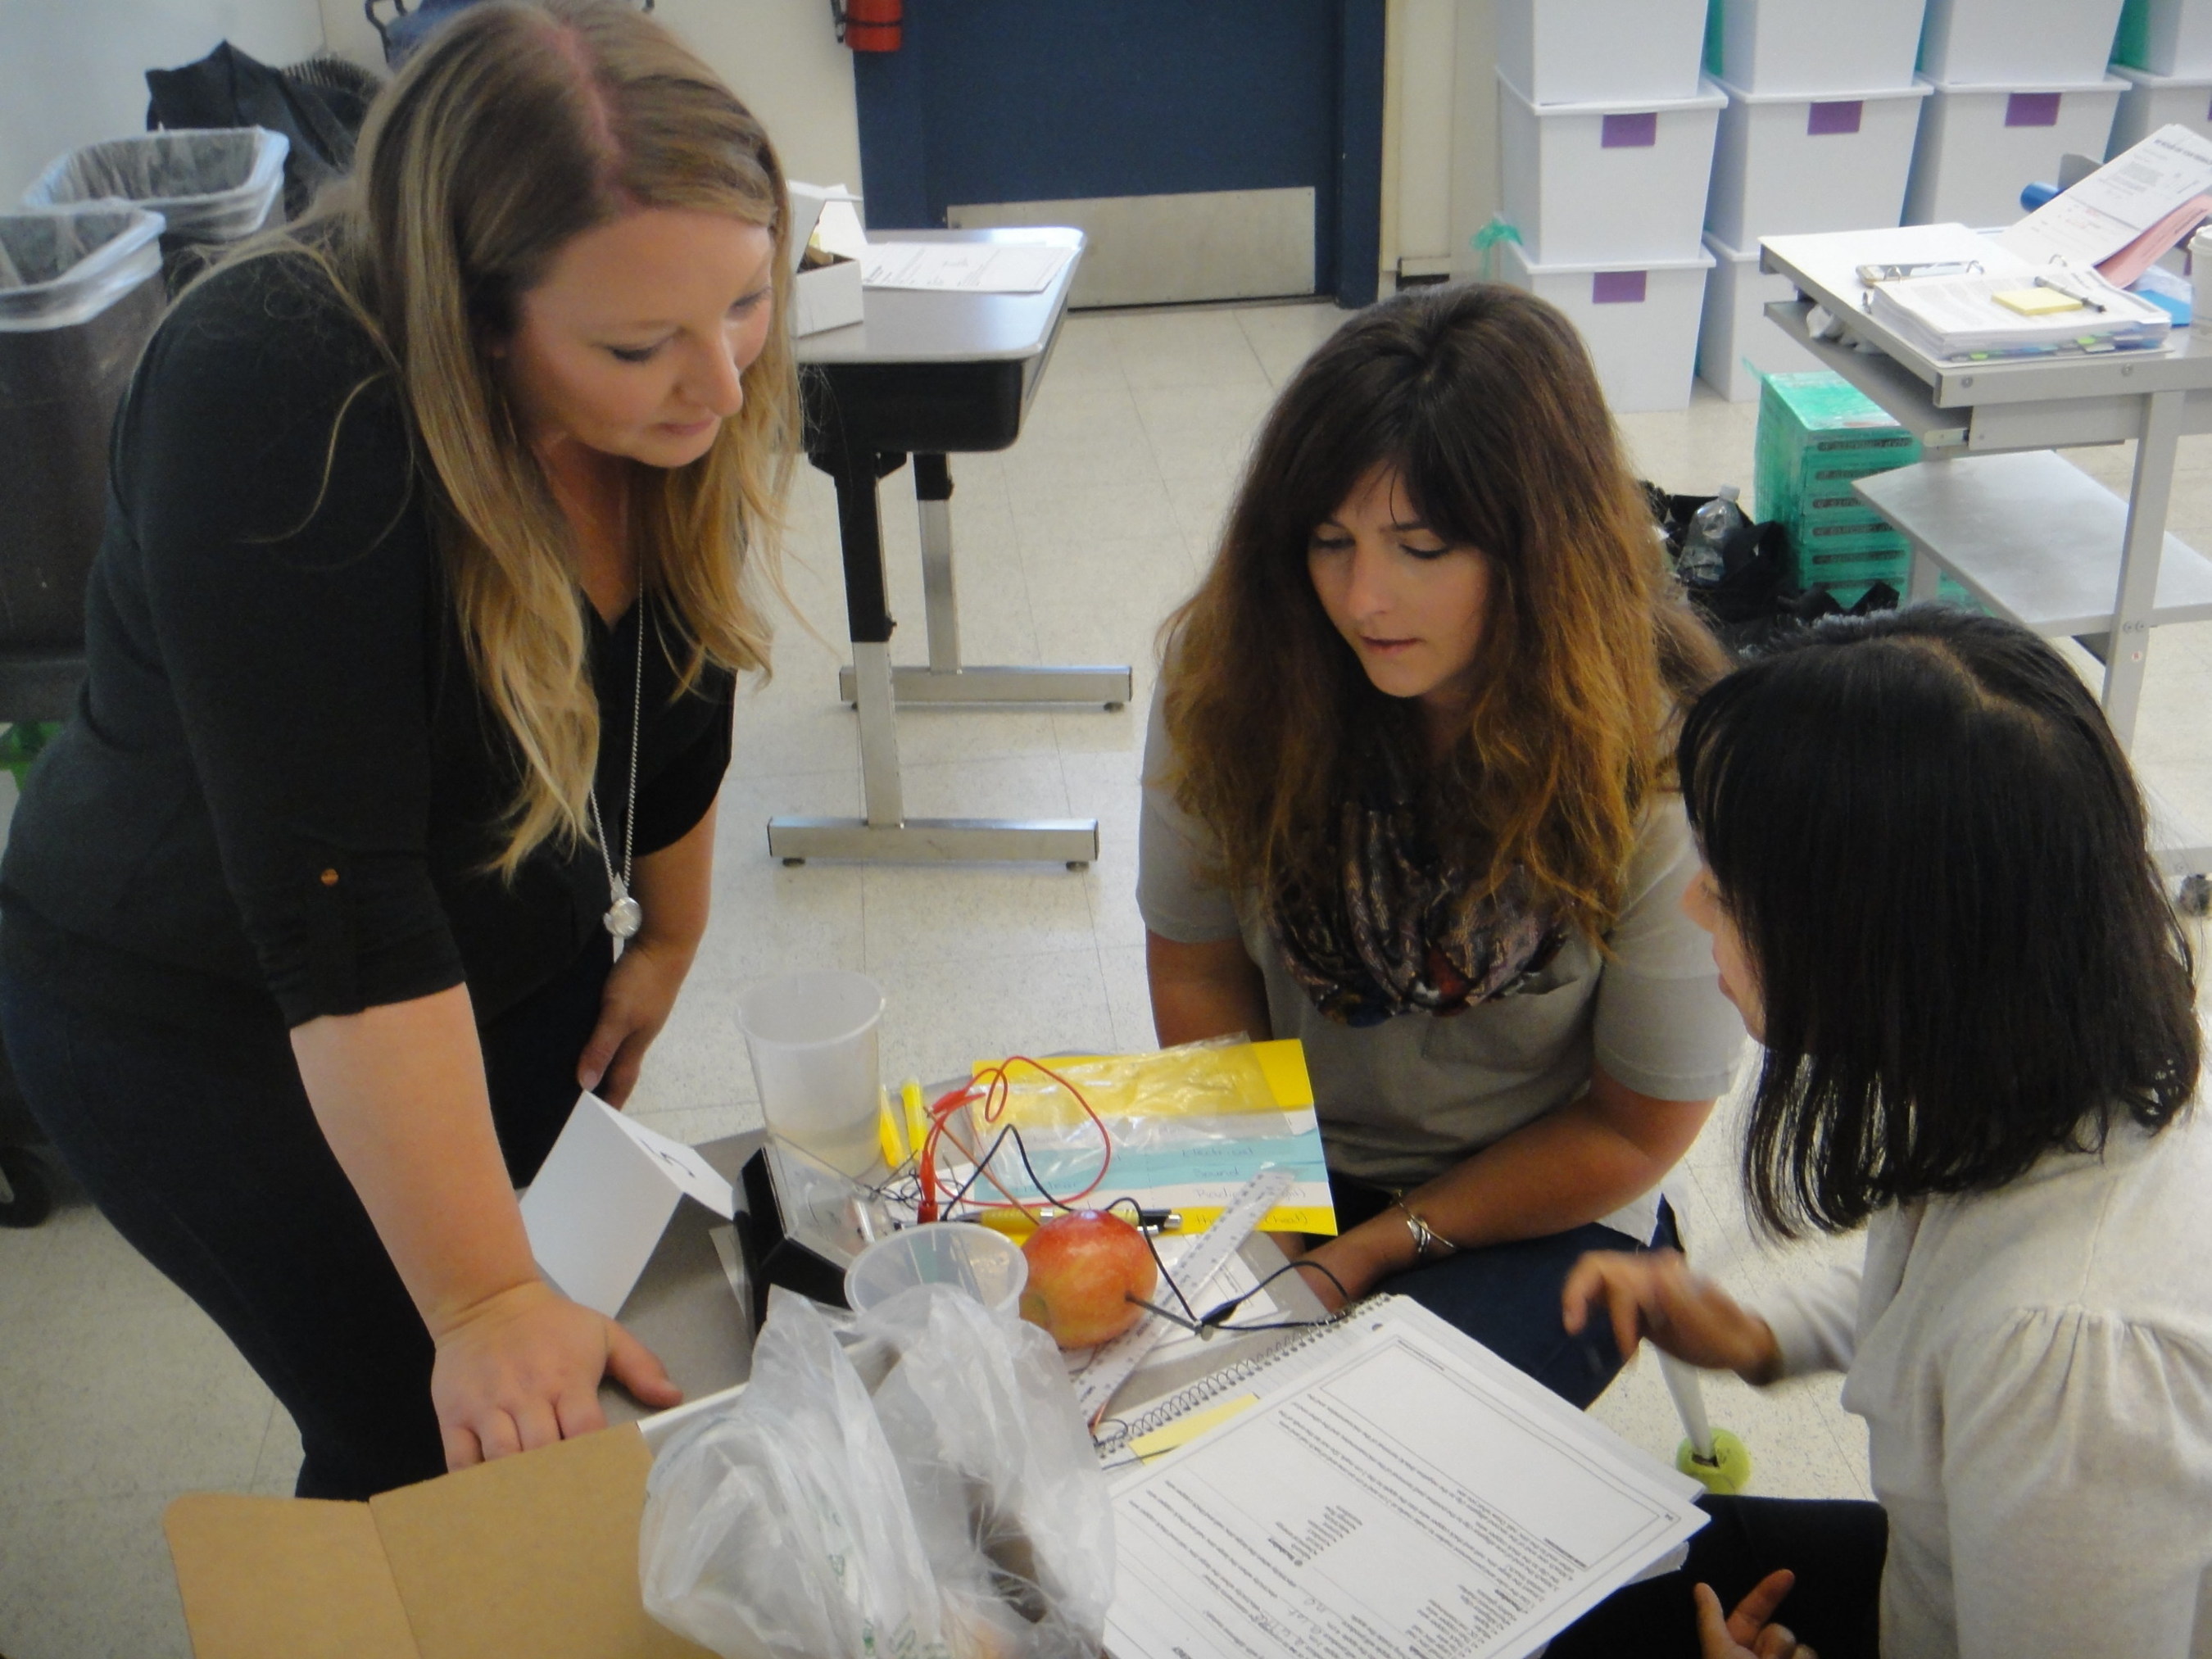 OpTerra STEM Educator Alison Smith works with SSFUSD teachers during the first week of the District's Summer STEM Institute. OpTerra has provided professional development training and hands-on energy curriculum tied to STEM for teachers throughout grade levels.